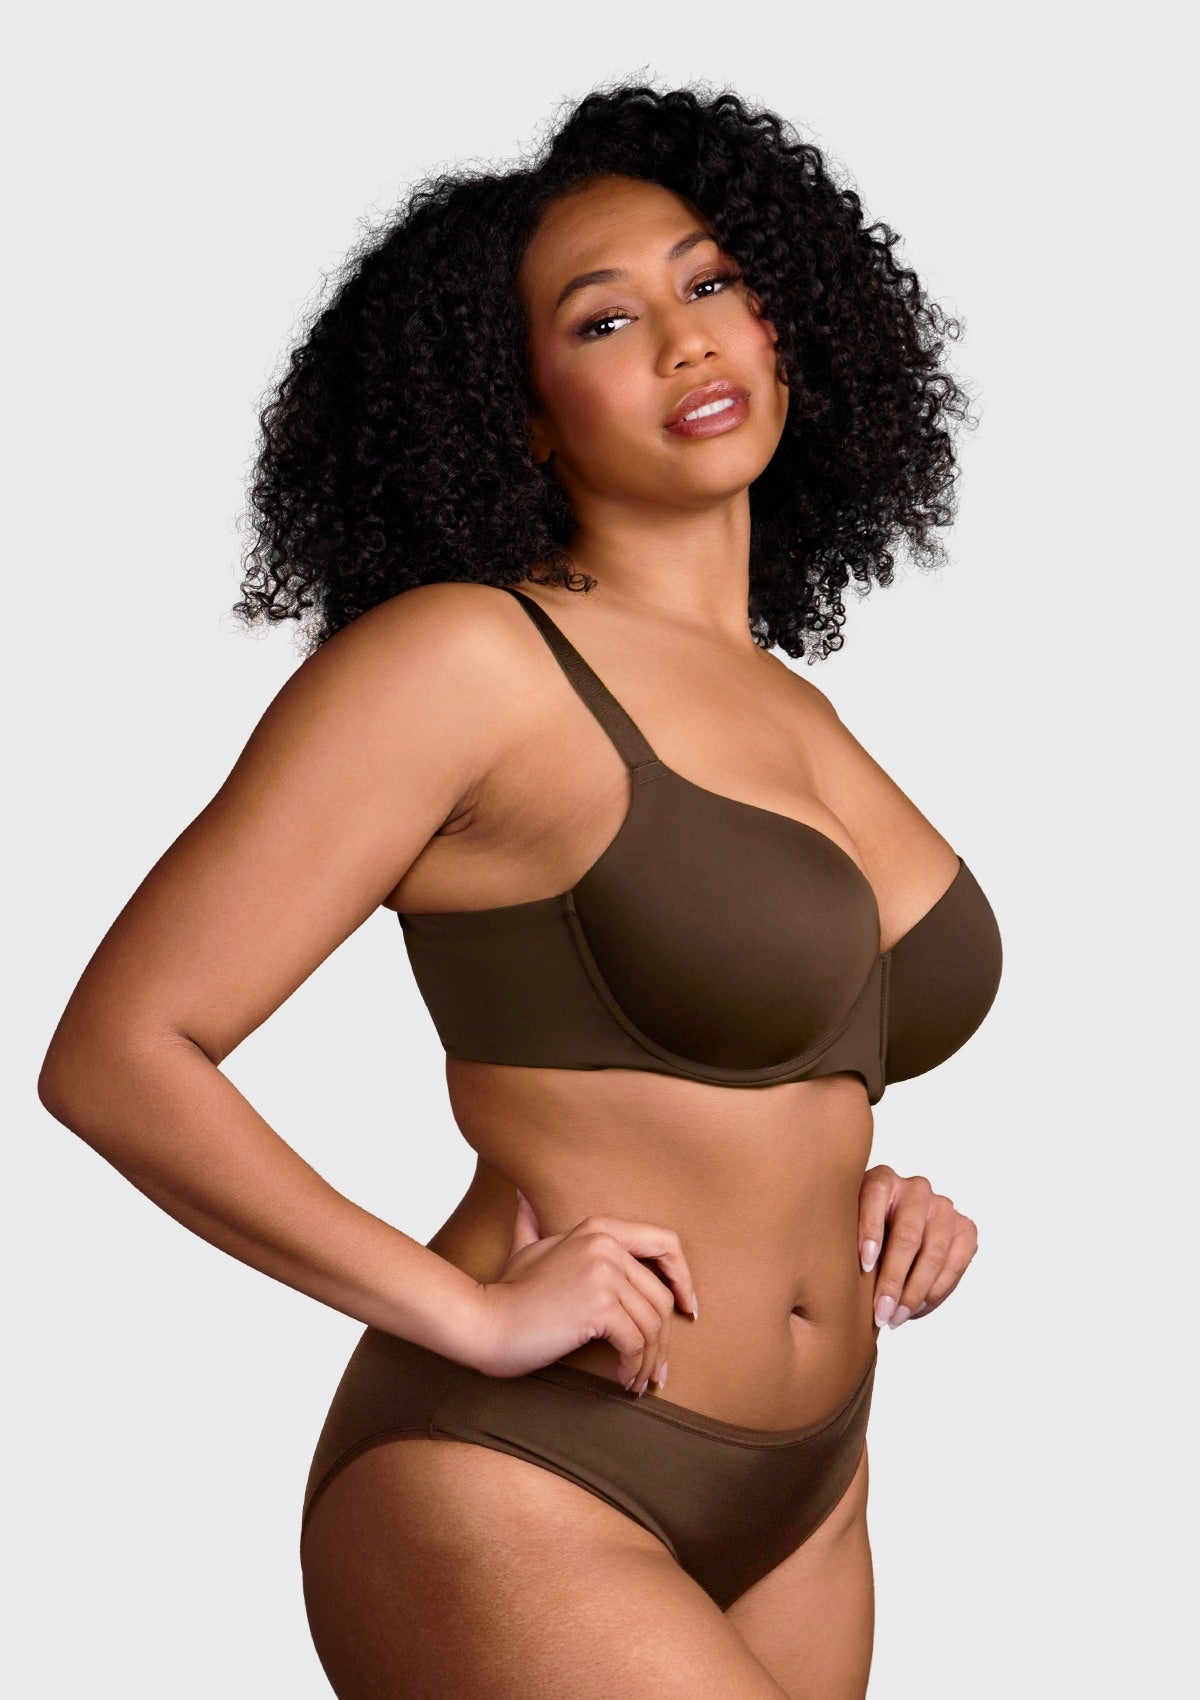 HSIA Gemma Smooth Supportive Padded T-shirt Bra - For Full Figures - Cocoa Brown / 36 / D